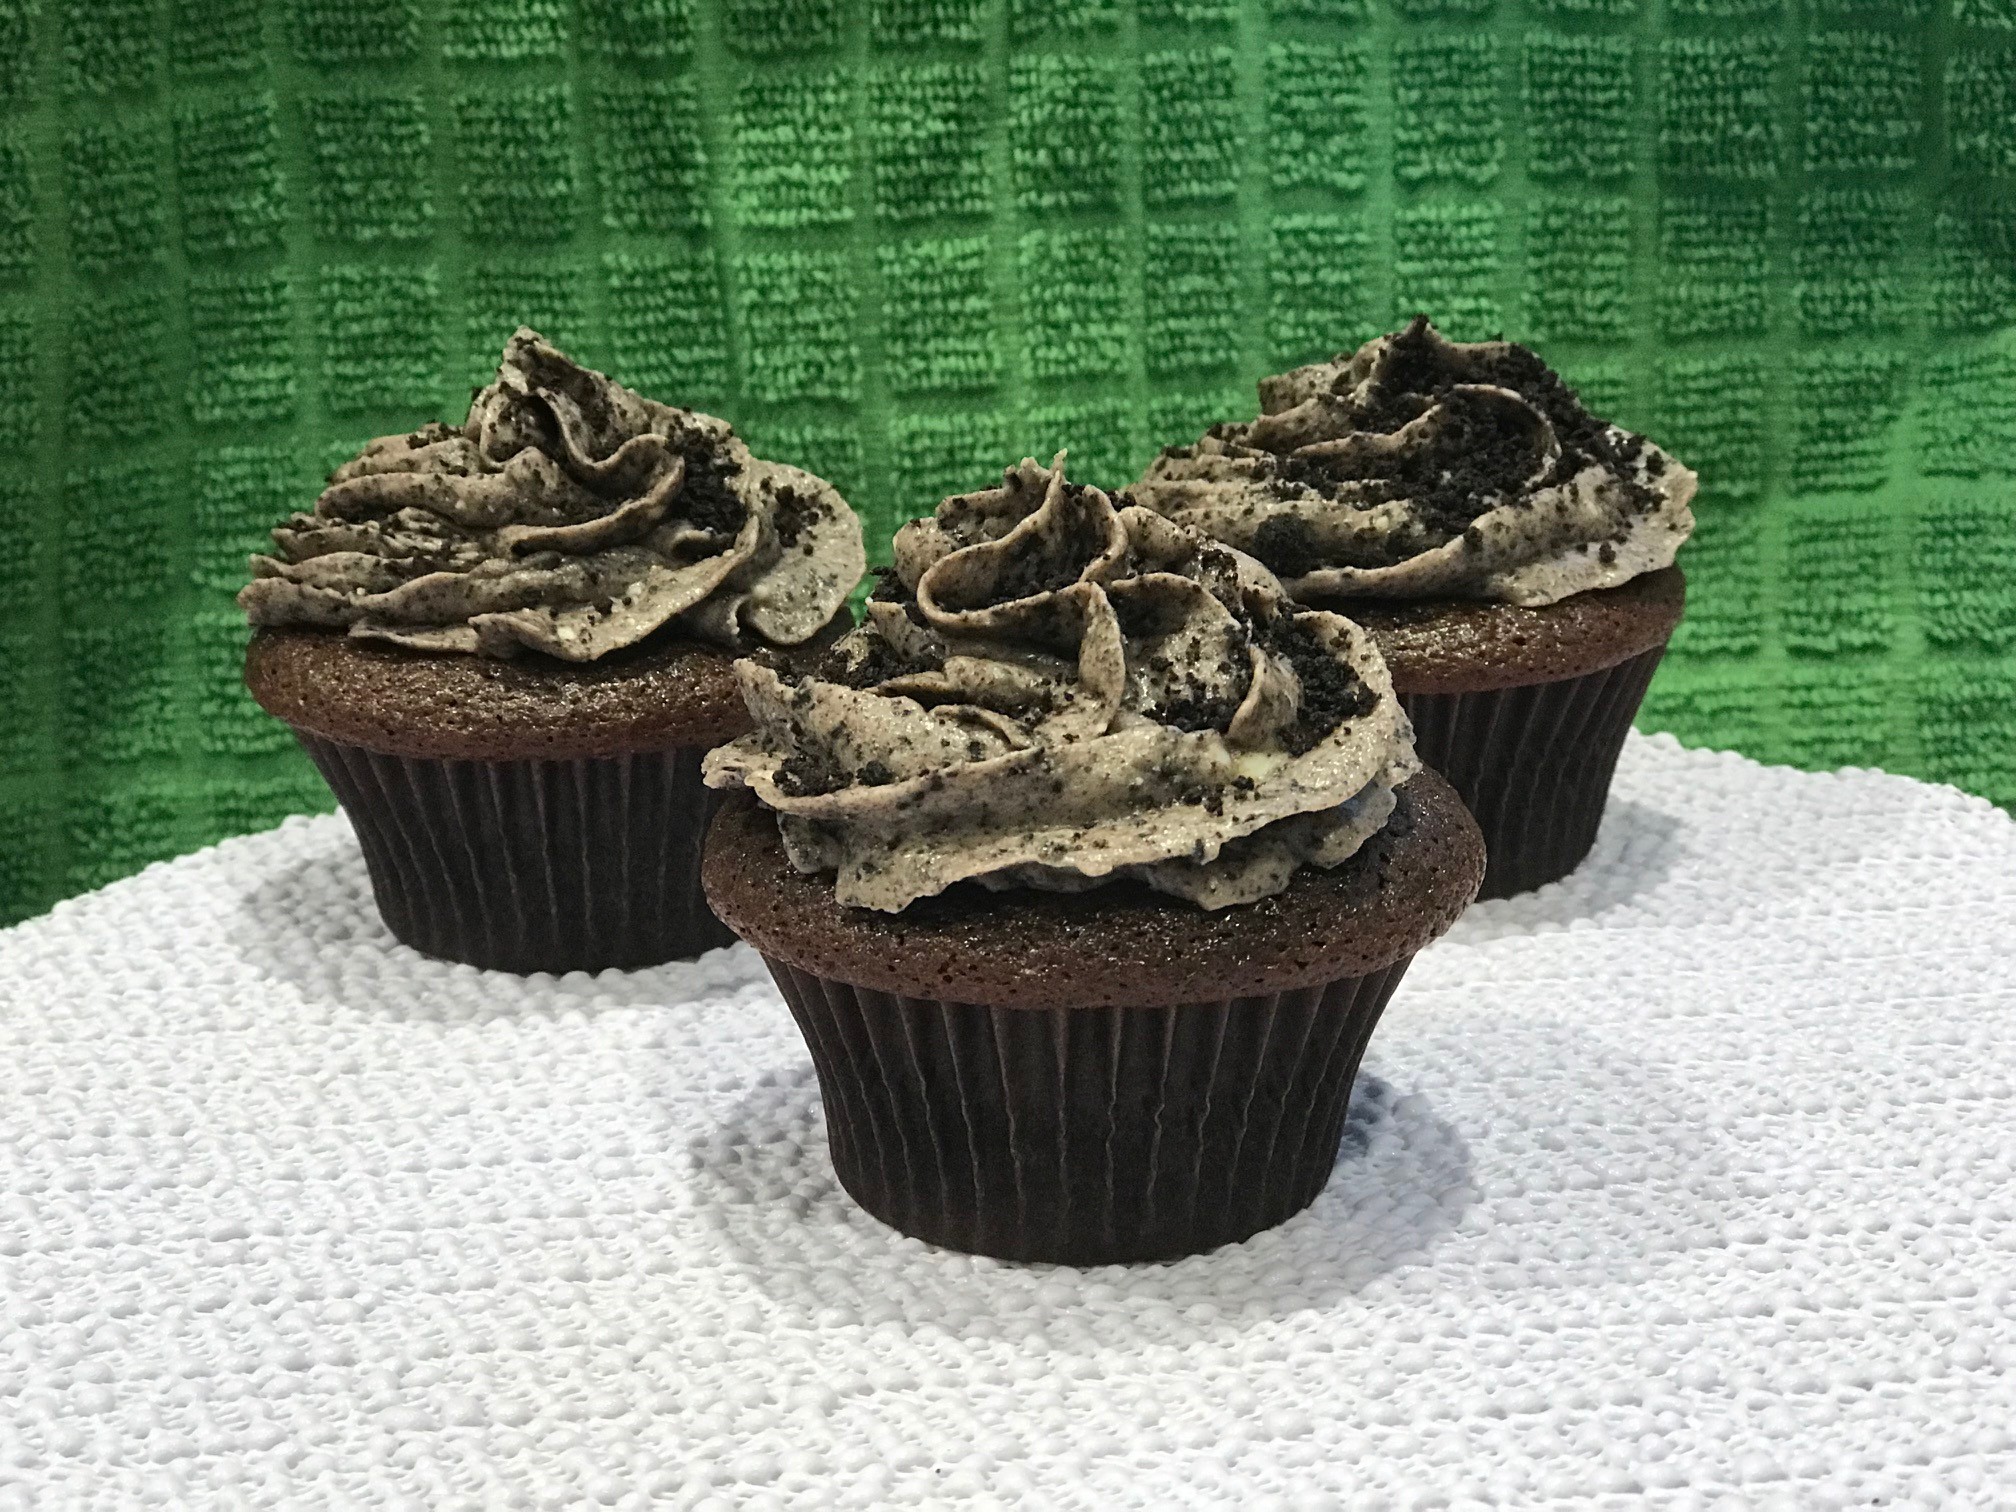 Chocolate Cupcakes with Cream Cheese-Oreo®-Buttercream Frosting